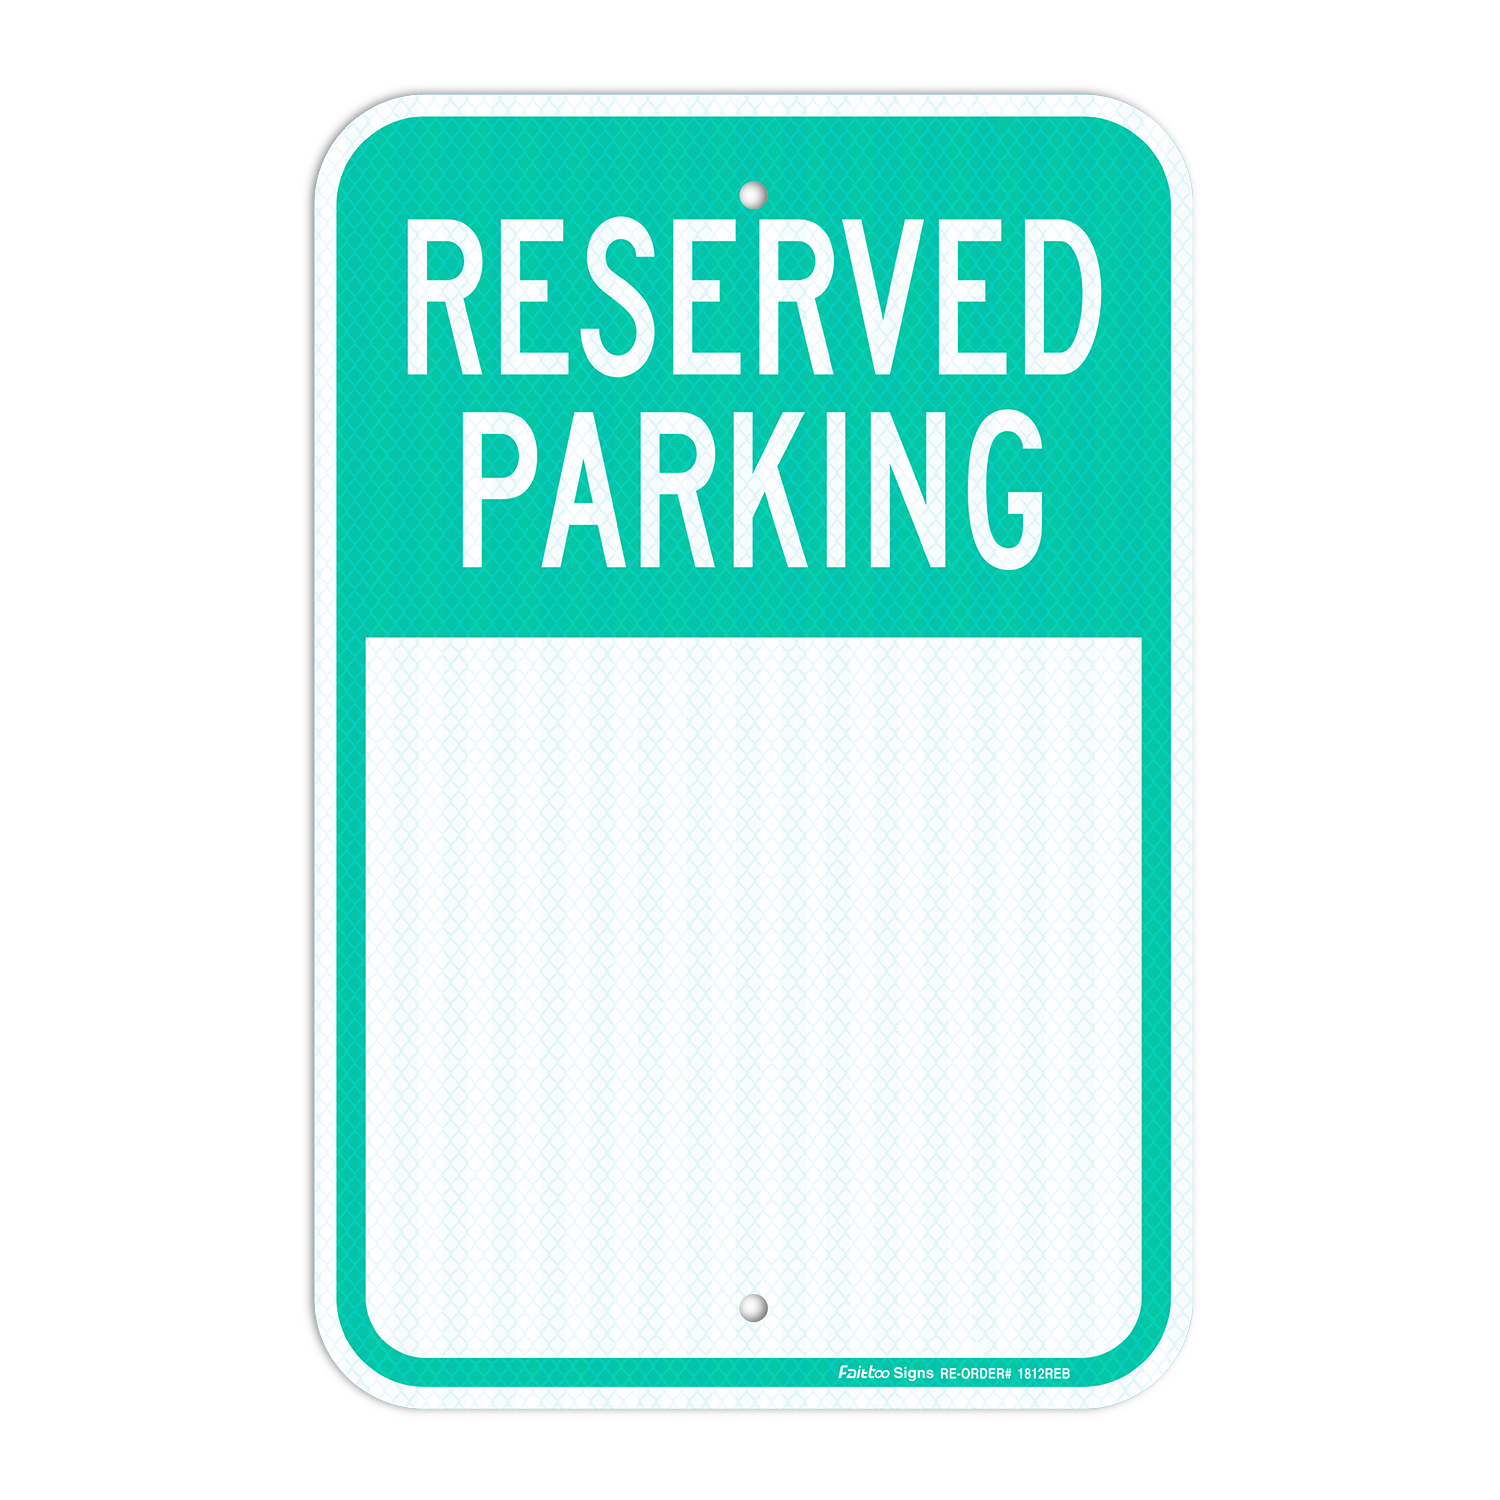 Blank Reserved Parking Sign,18 x 12 Inch Engineer Grade Reflective Aluminum, Weather/Fade Resistant, UV Protected, Easy to Install and Read, Indoor/Outdoors Use